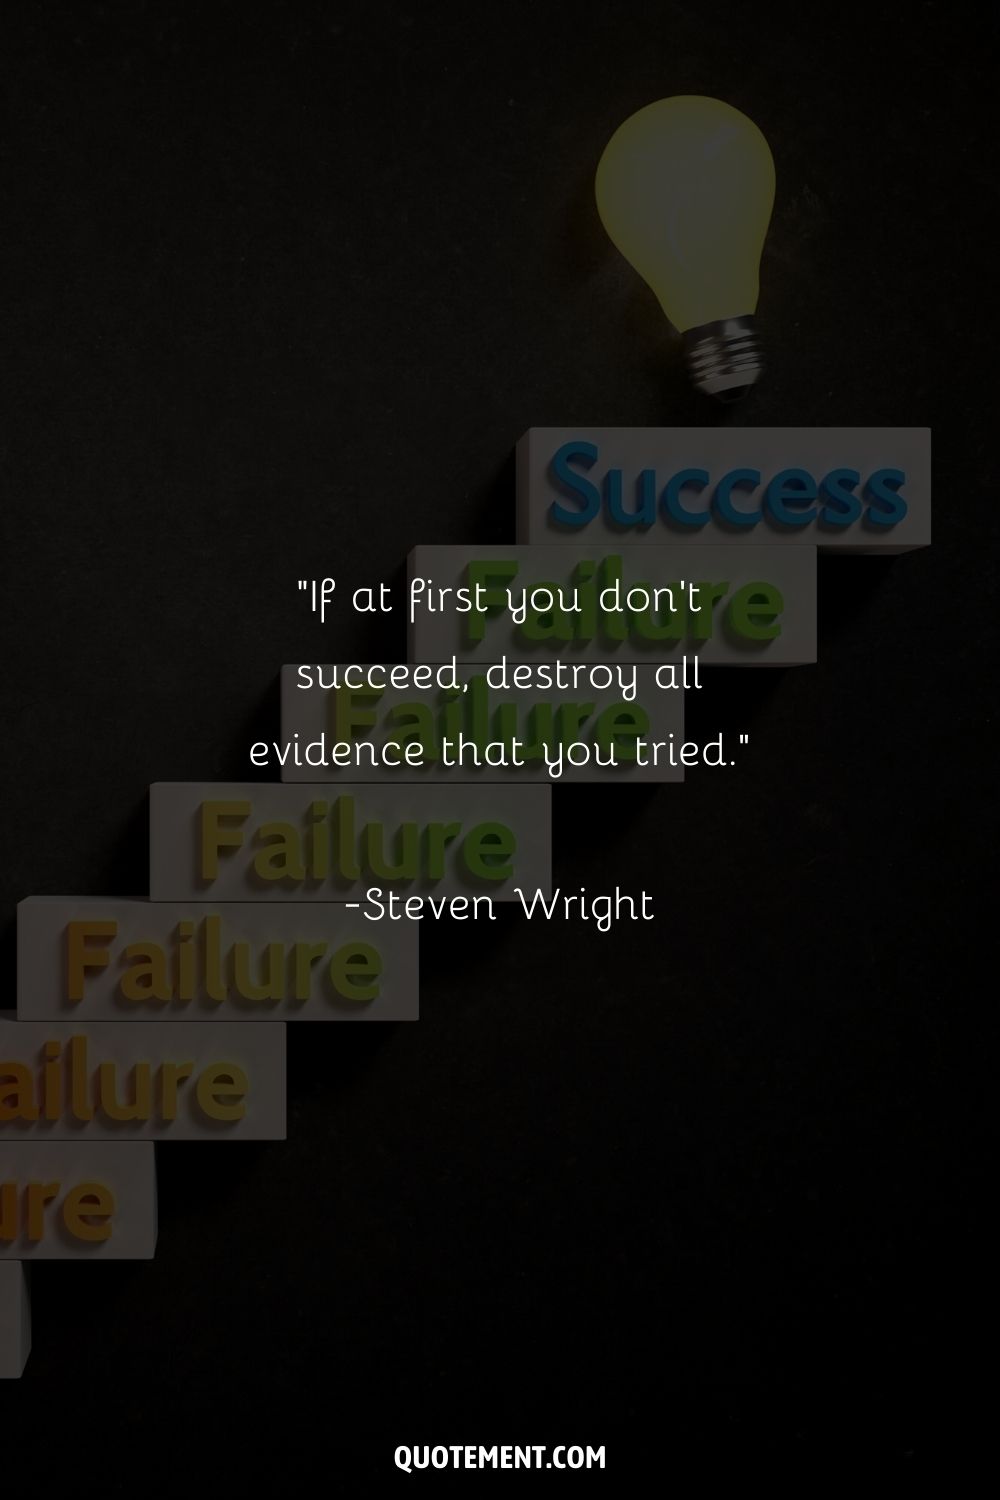 “If at first you don't succeed, destroy all evidence that you tried.” ― Steven Wright